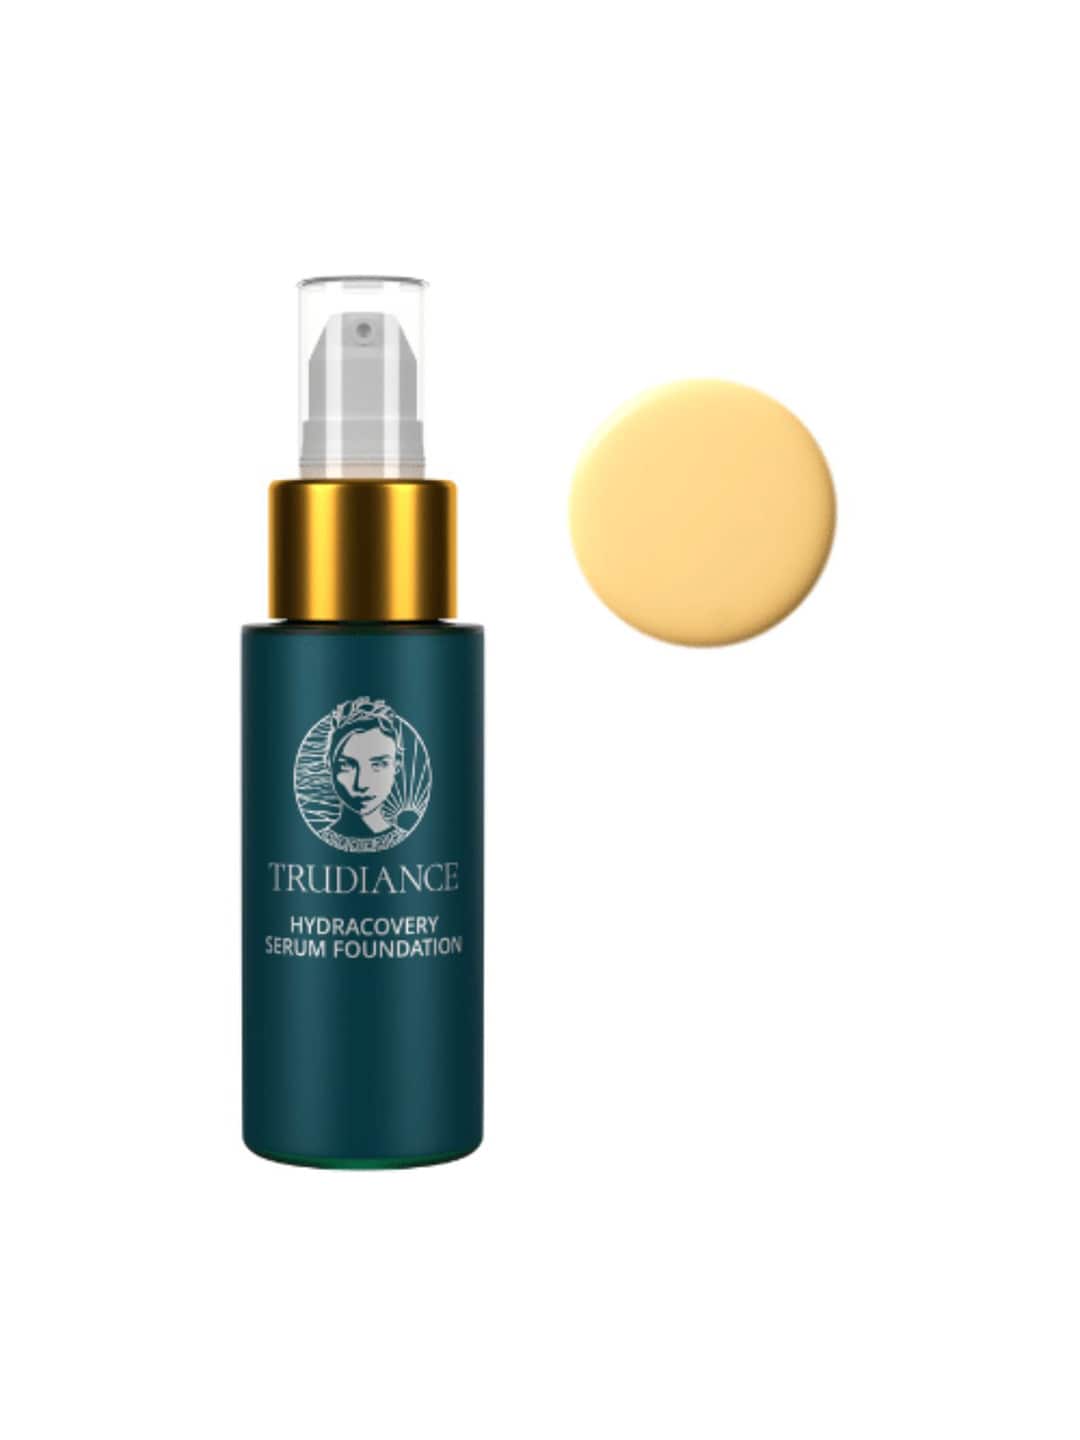 TRUDIANCE HydraCovery Serum Foundation - Citrine 30ml Price in India